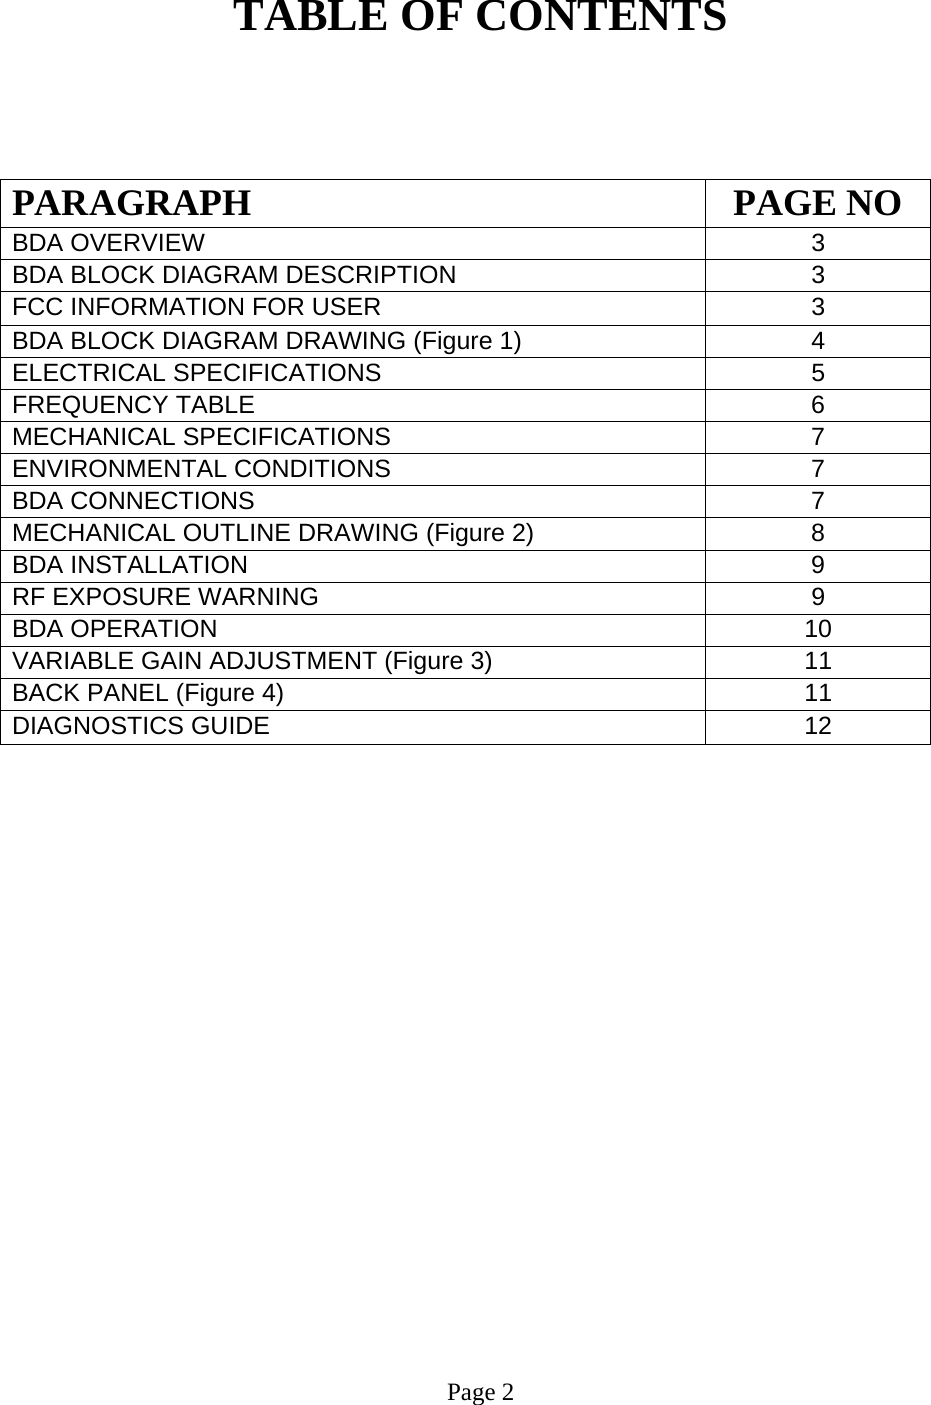  TABLE OF CONTENTS    PARAGRAPH PAGE NO BDA OVERVIEW   3 BDA BLOCK DIAGRAM DESCRIPTION 3 FCC INFORMATION FOR USER 3 BDA BLOCK DIAGRAM DRAWING (Figure 1)  4 ELECTRICAL SPECIFICATIONS   5  FREQUENCY TABLE   6 MECHANICAL SPECIFICATIONS   7 ENVIRONMENTAL CONDITIONS   7  BDA CONNECTIONS    7  MECHANICAL OUTLINE DRAWING (Figure 2)  8 BDA INSTALLATION  9 RF EXPOSURE WARNING   9 BDA OPERATION 10 VARIABLE GAIN ADJUSTMENT (Figure 3)  11 BACK PANEL (Figure 4)   11 DIAGNOSTICS GUIDE  12                       Page 2  